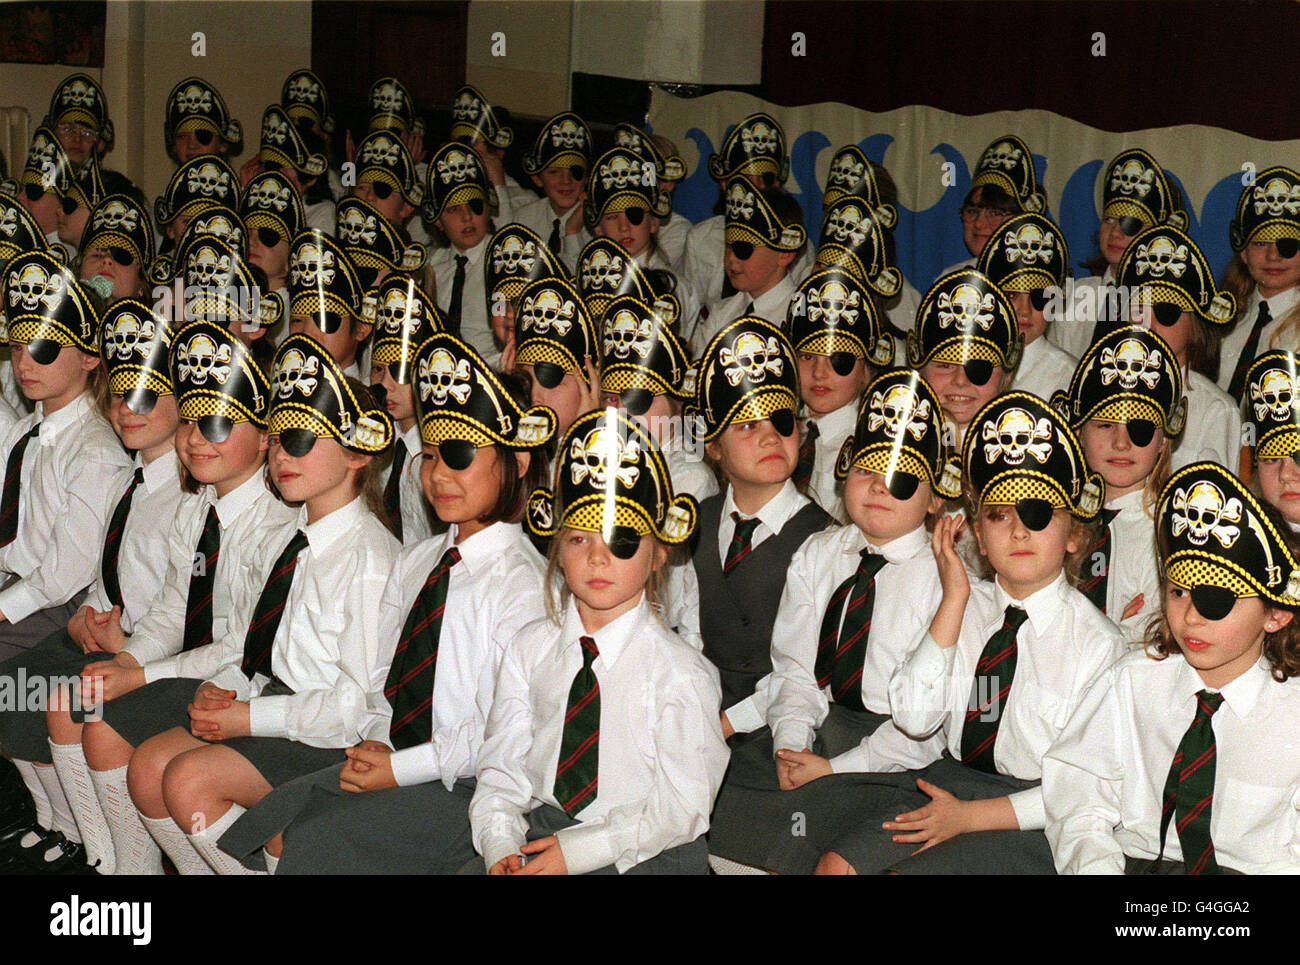 ROYAL/Pupils in Pirate headwear Stock Photo